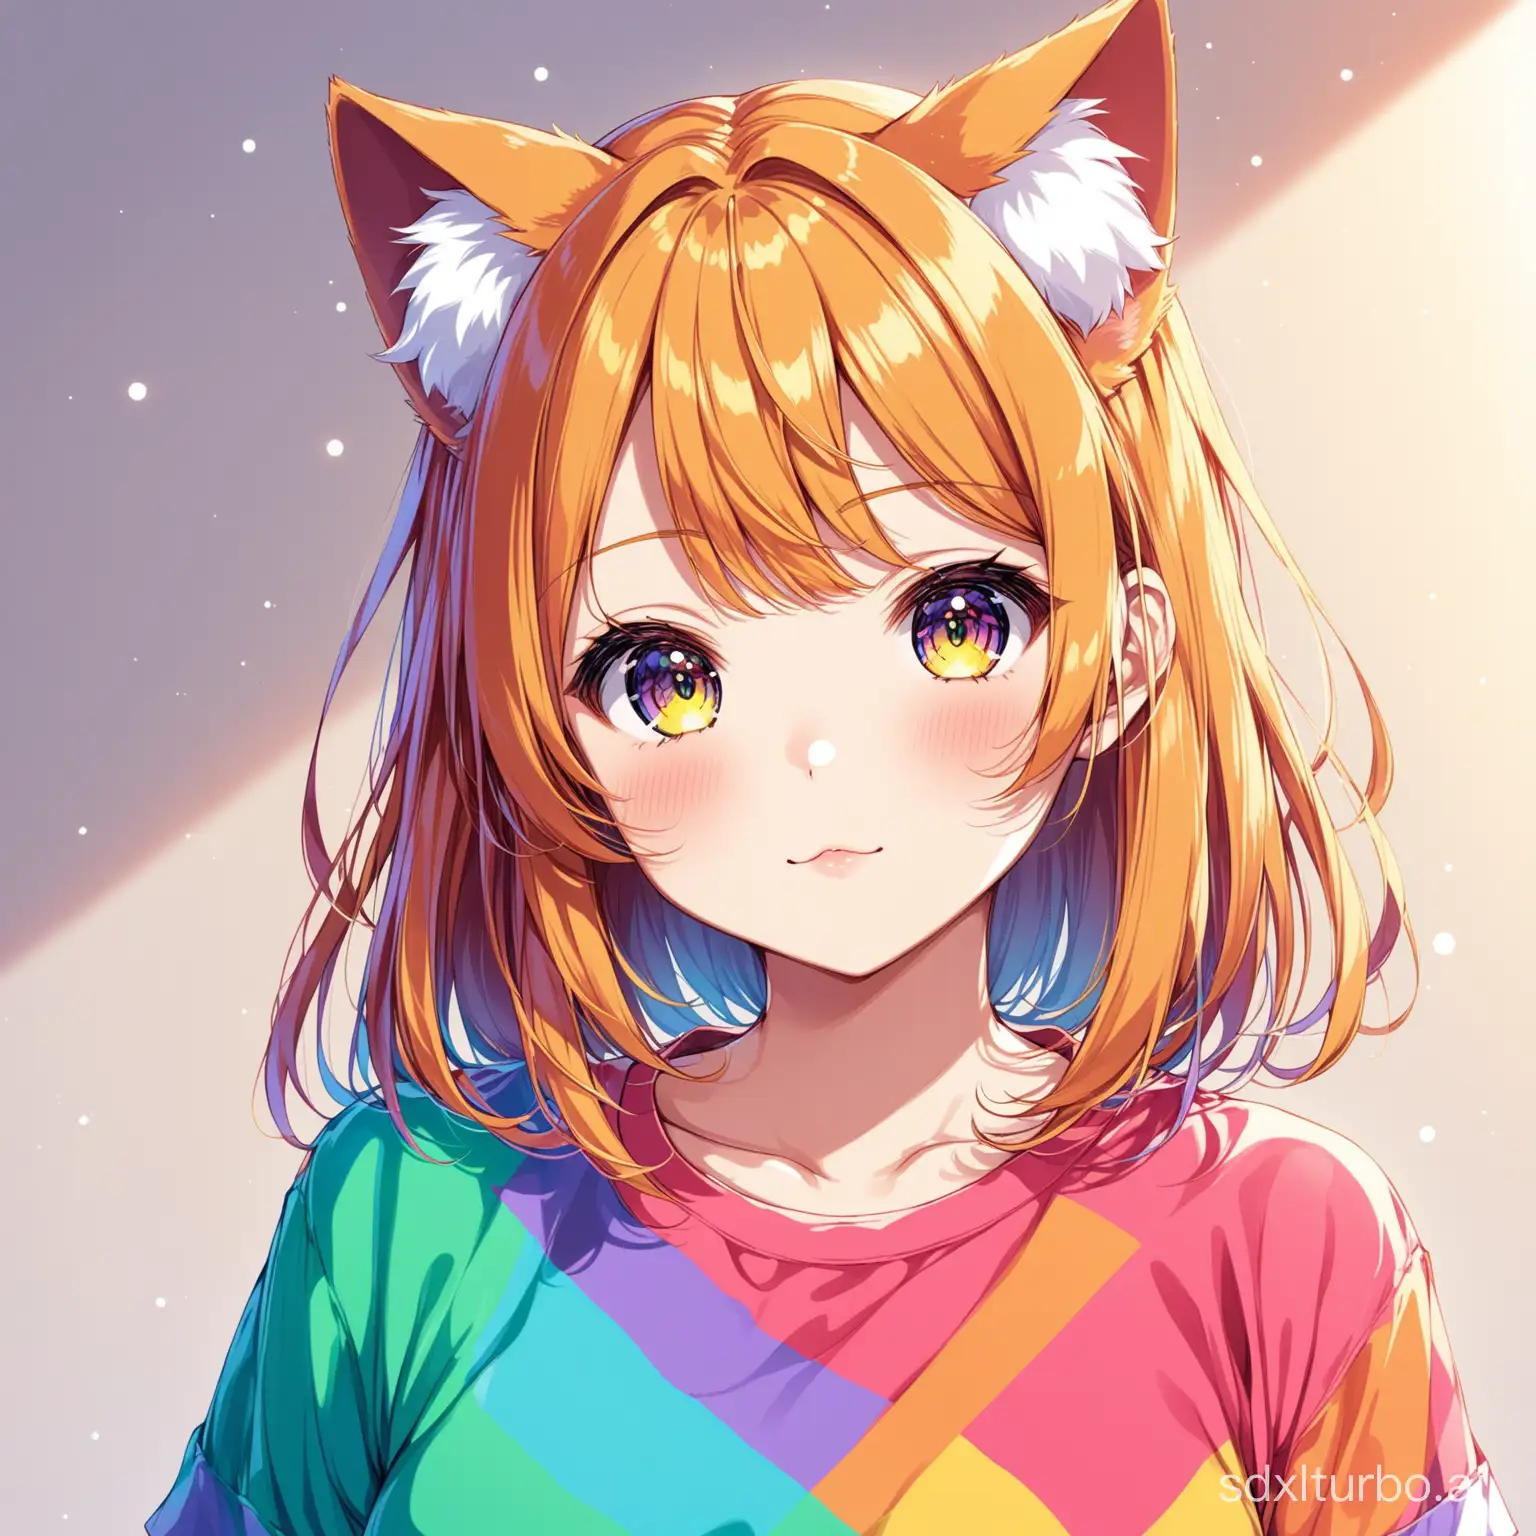 Anime girl with cat ears wearing a colorful shirt